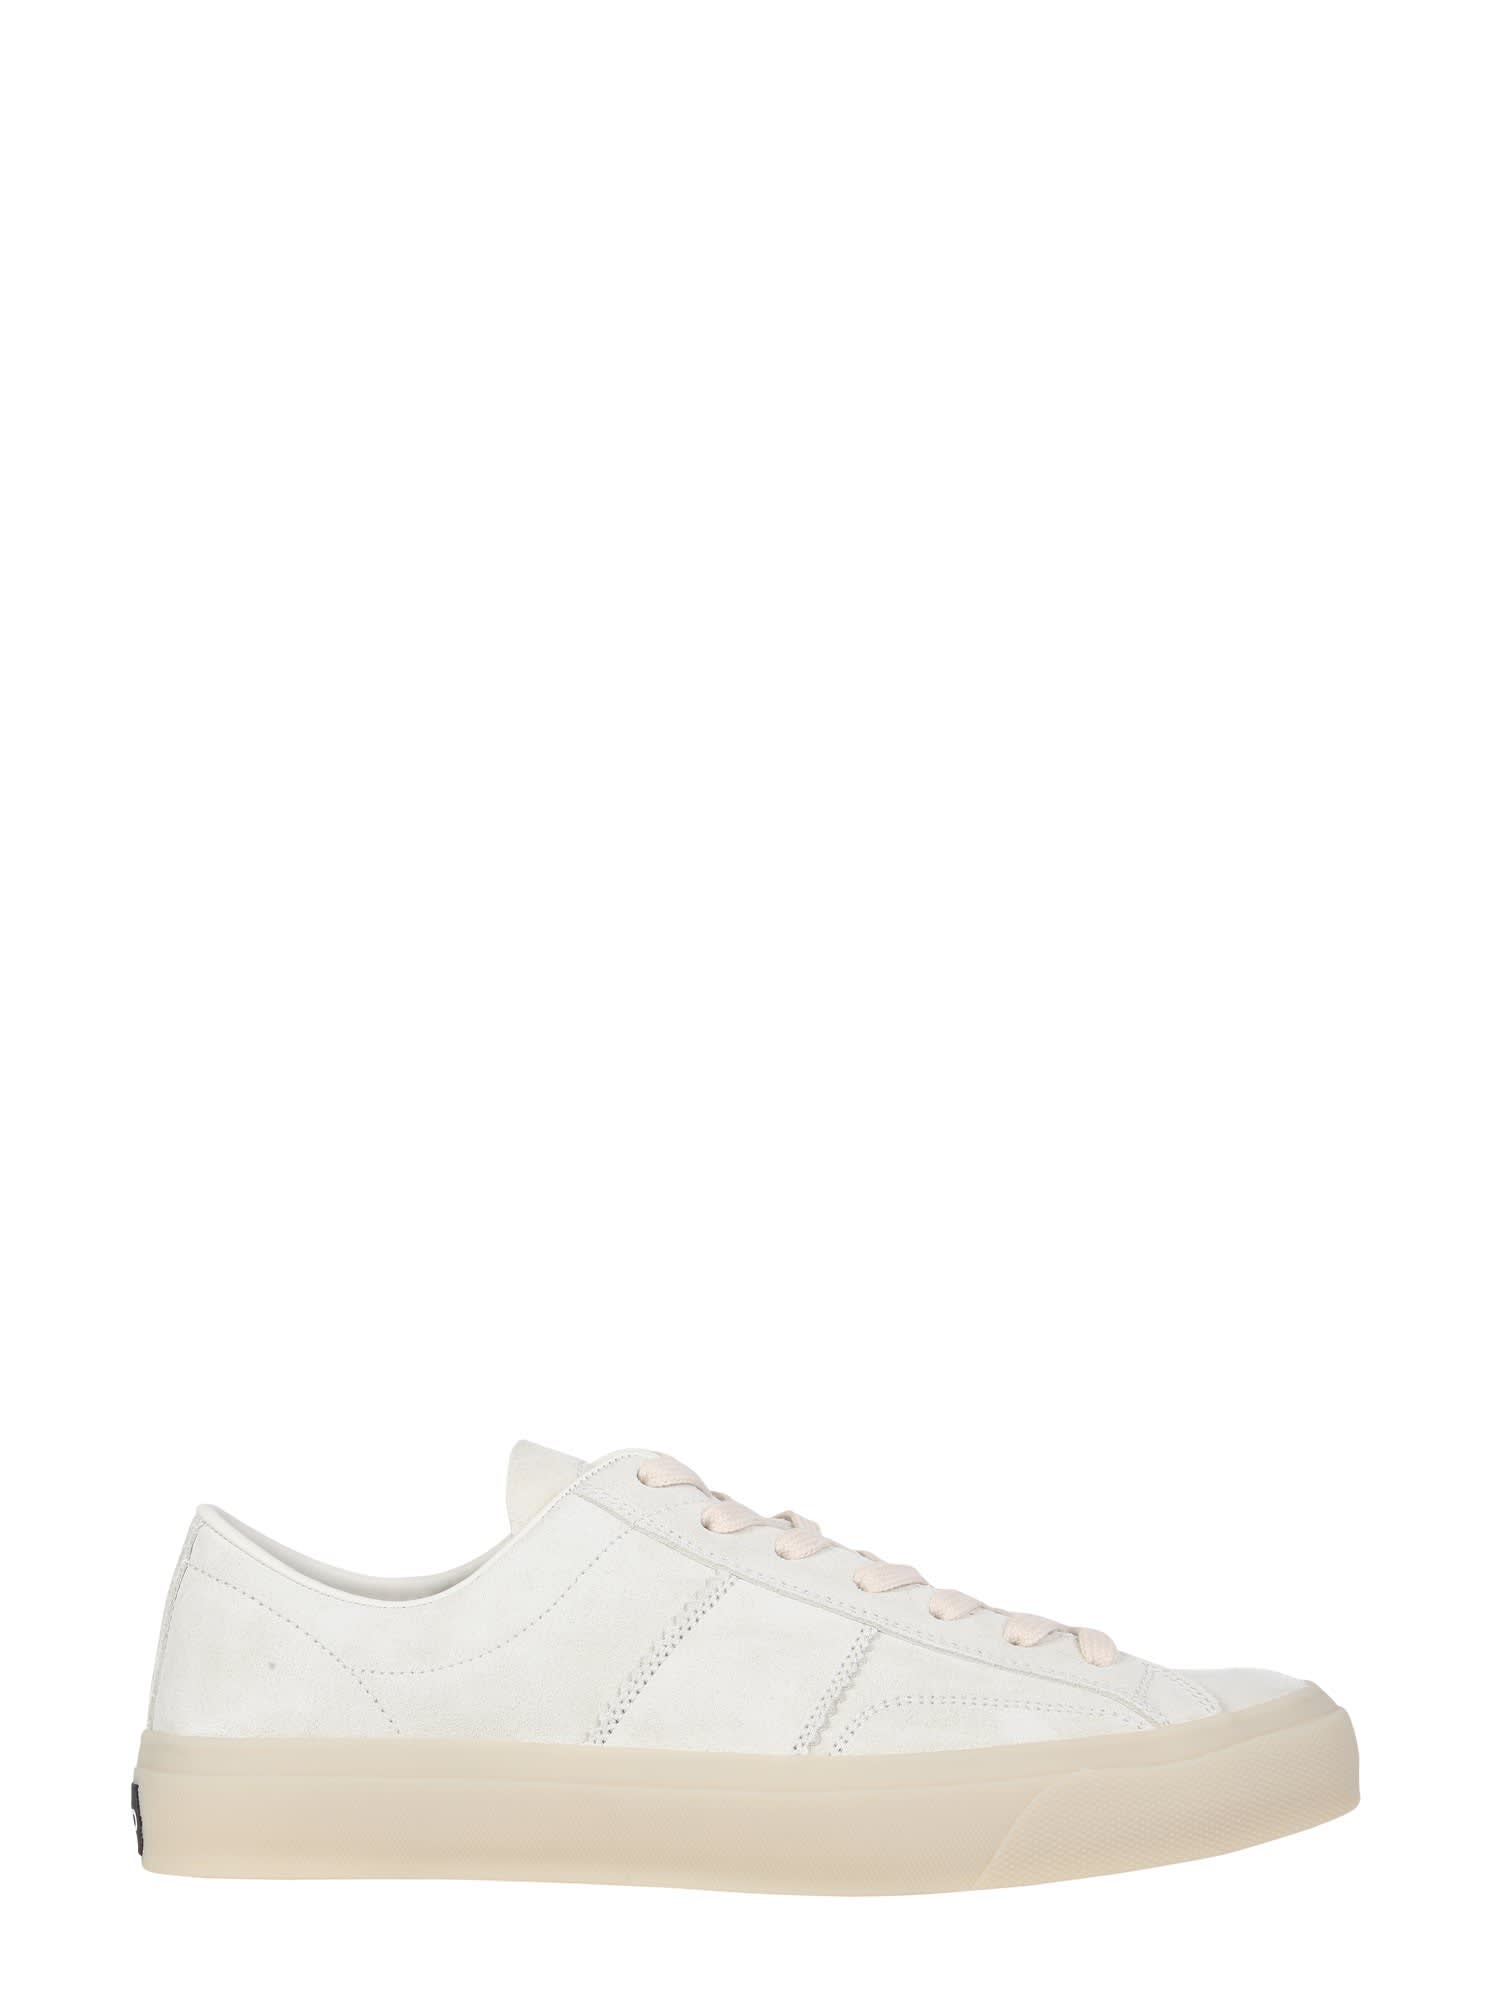 Tom Ford Cambrdige Sneakers